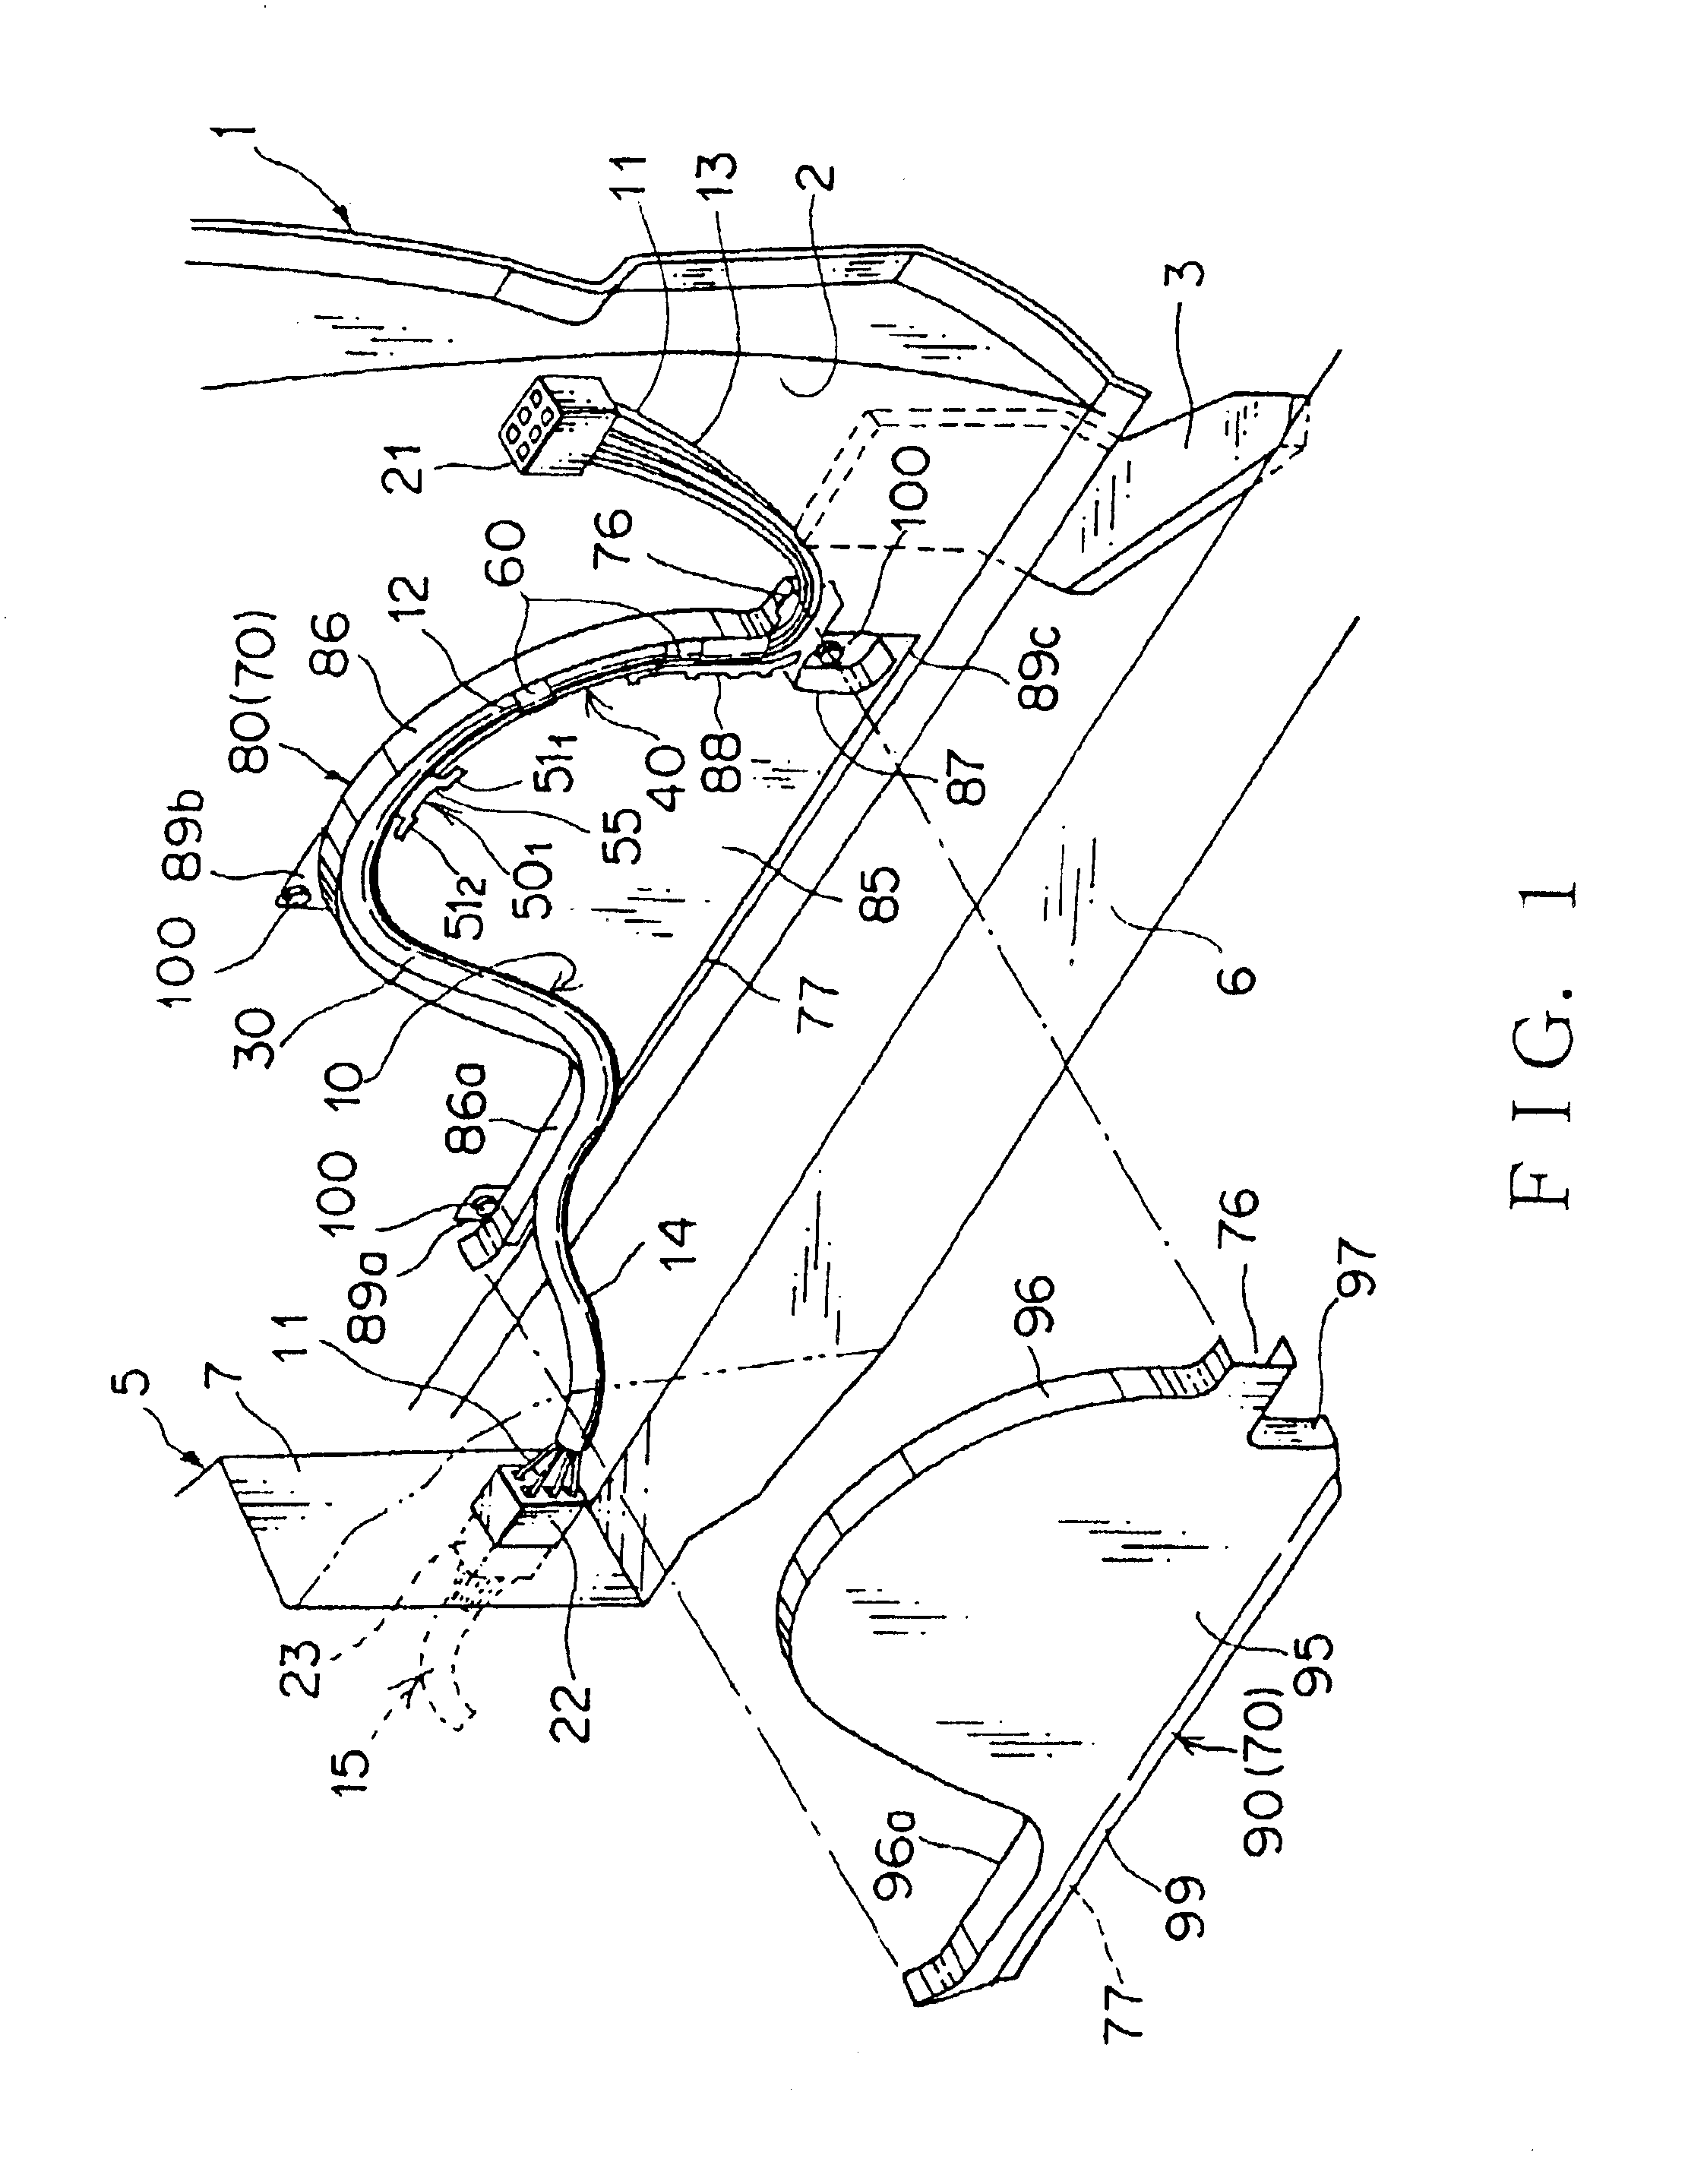 Power supply apparatus with vibration absorbing member for sliding structure